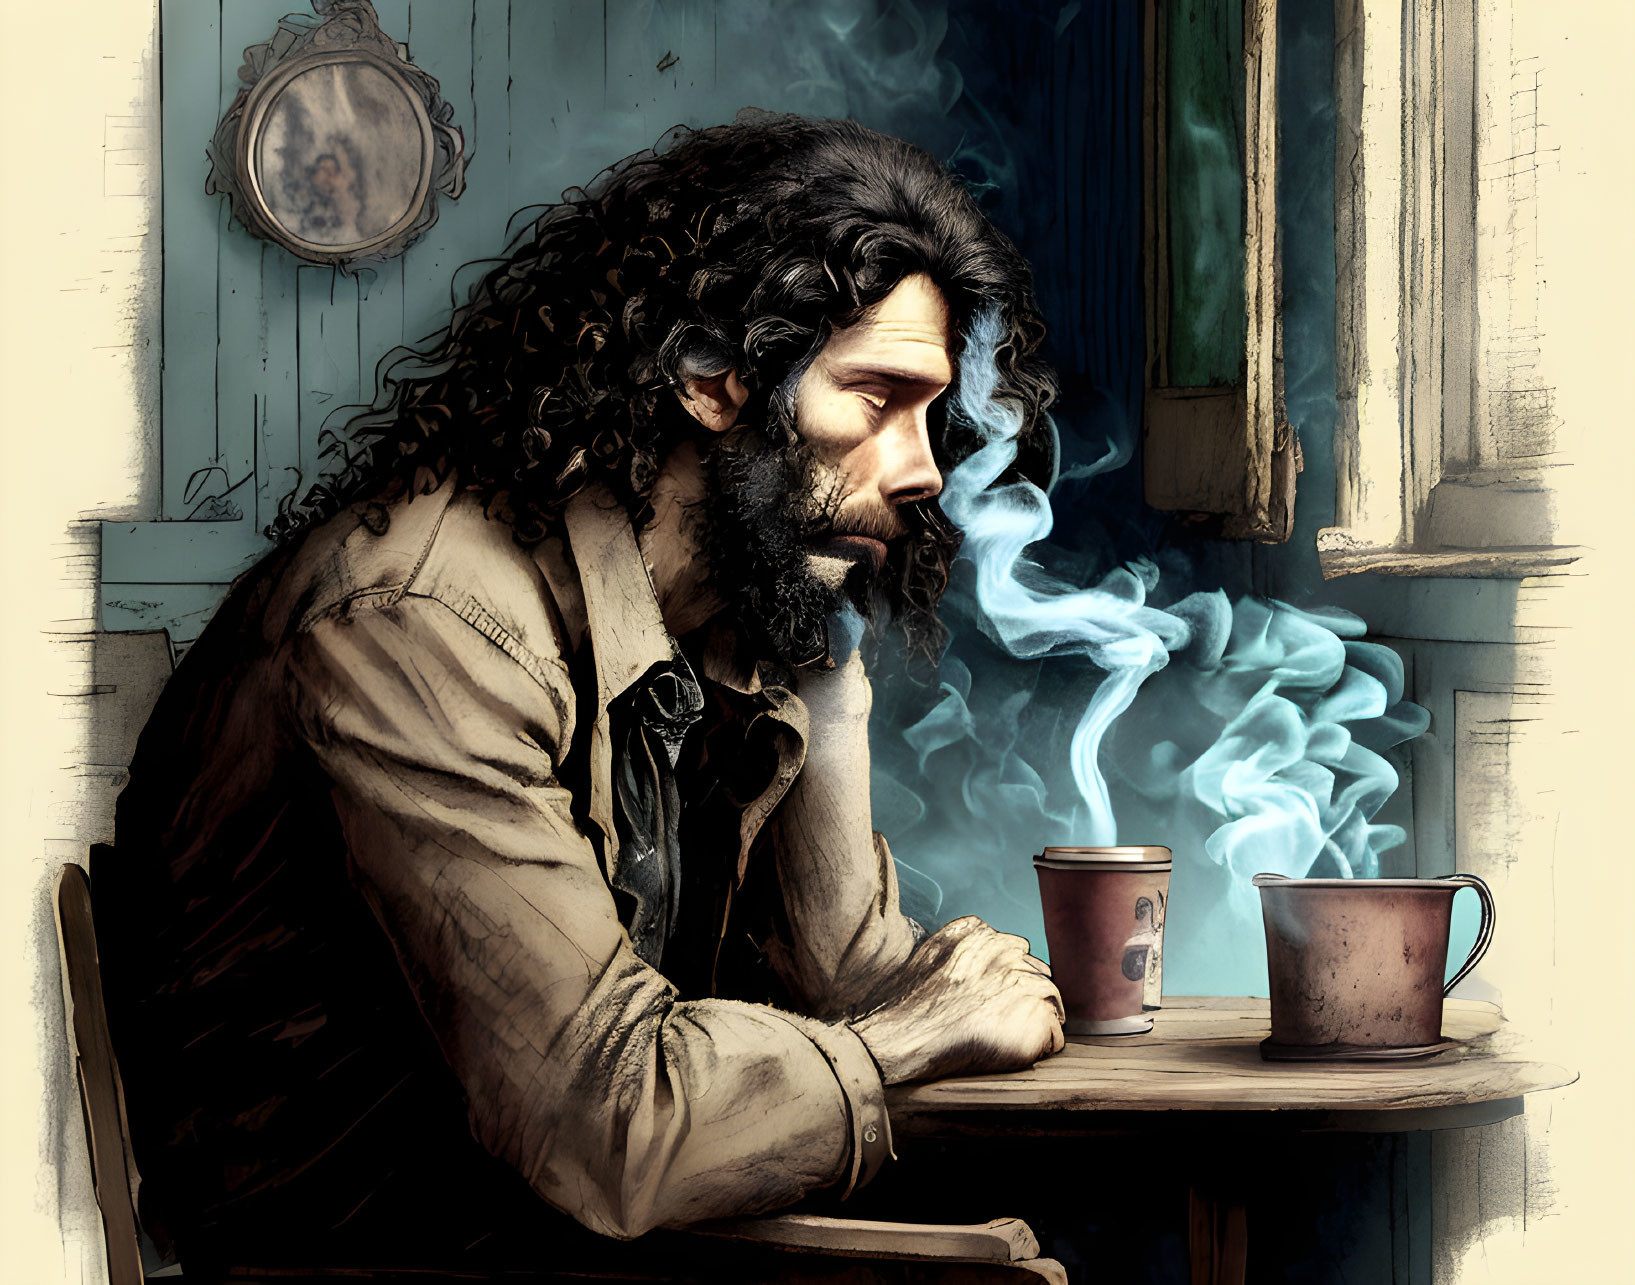 Man with Long Curly Hair Sitting at Wooden Table in Rustic Room